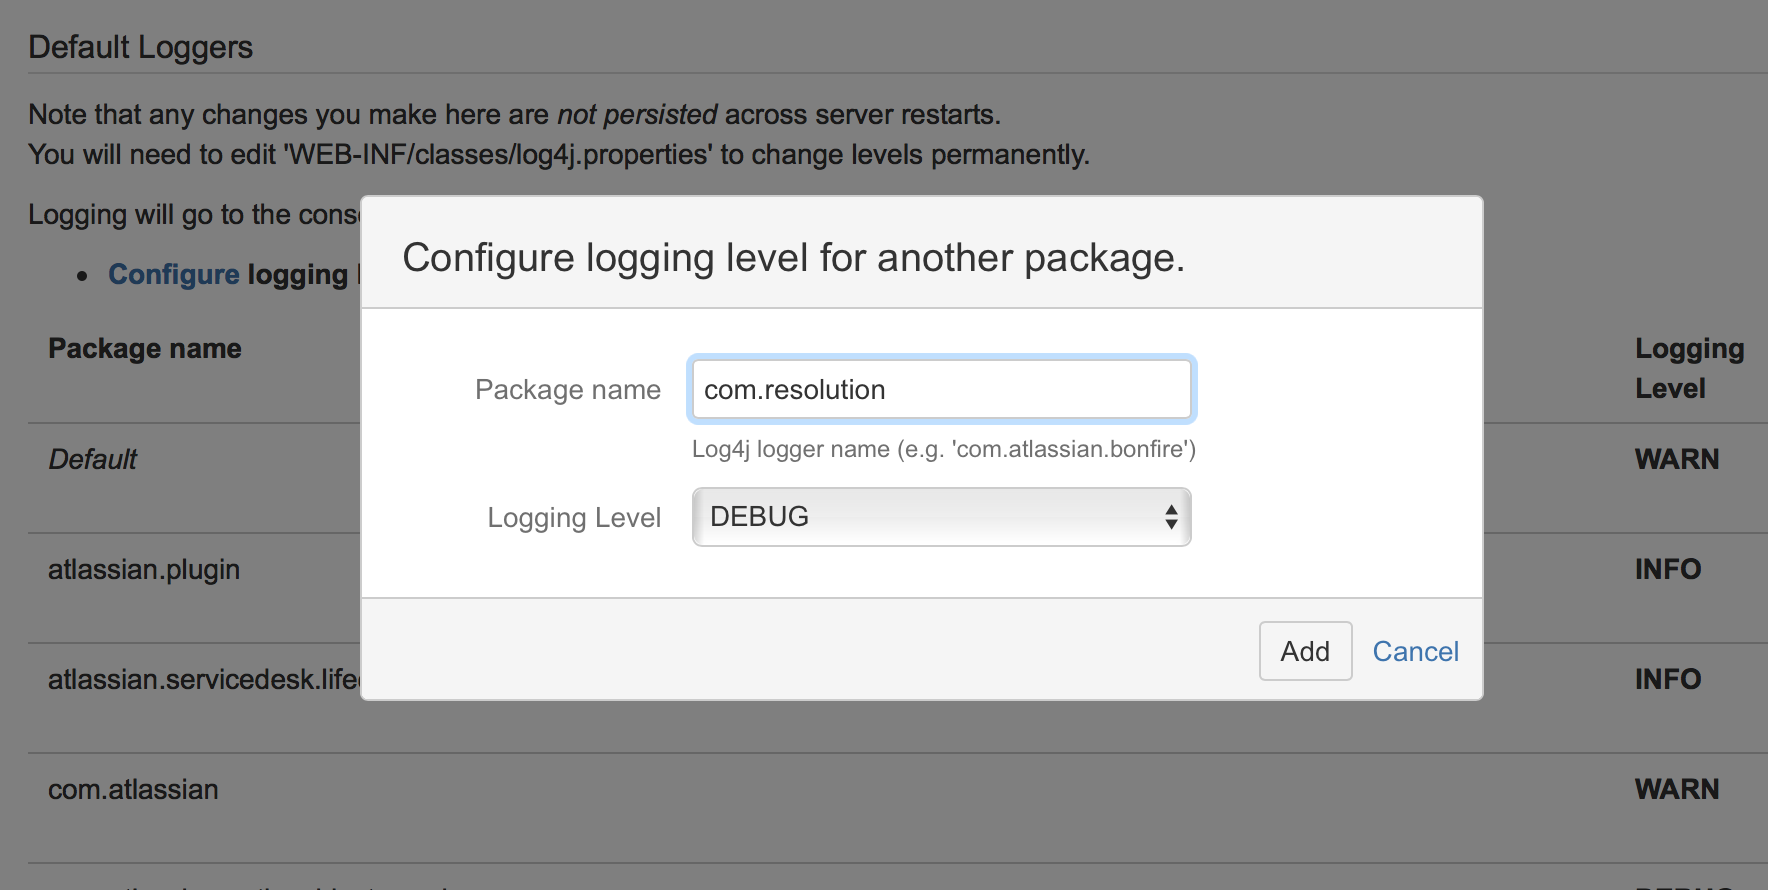 For Jira, Confluence and Bamboo add each of the two package names and select DEBUG as log level